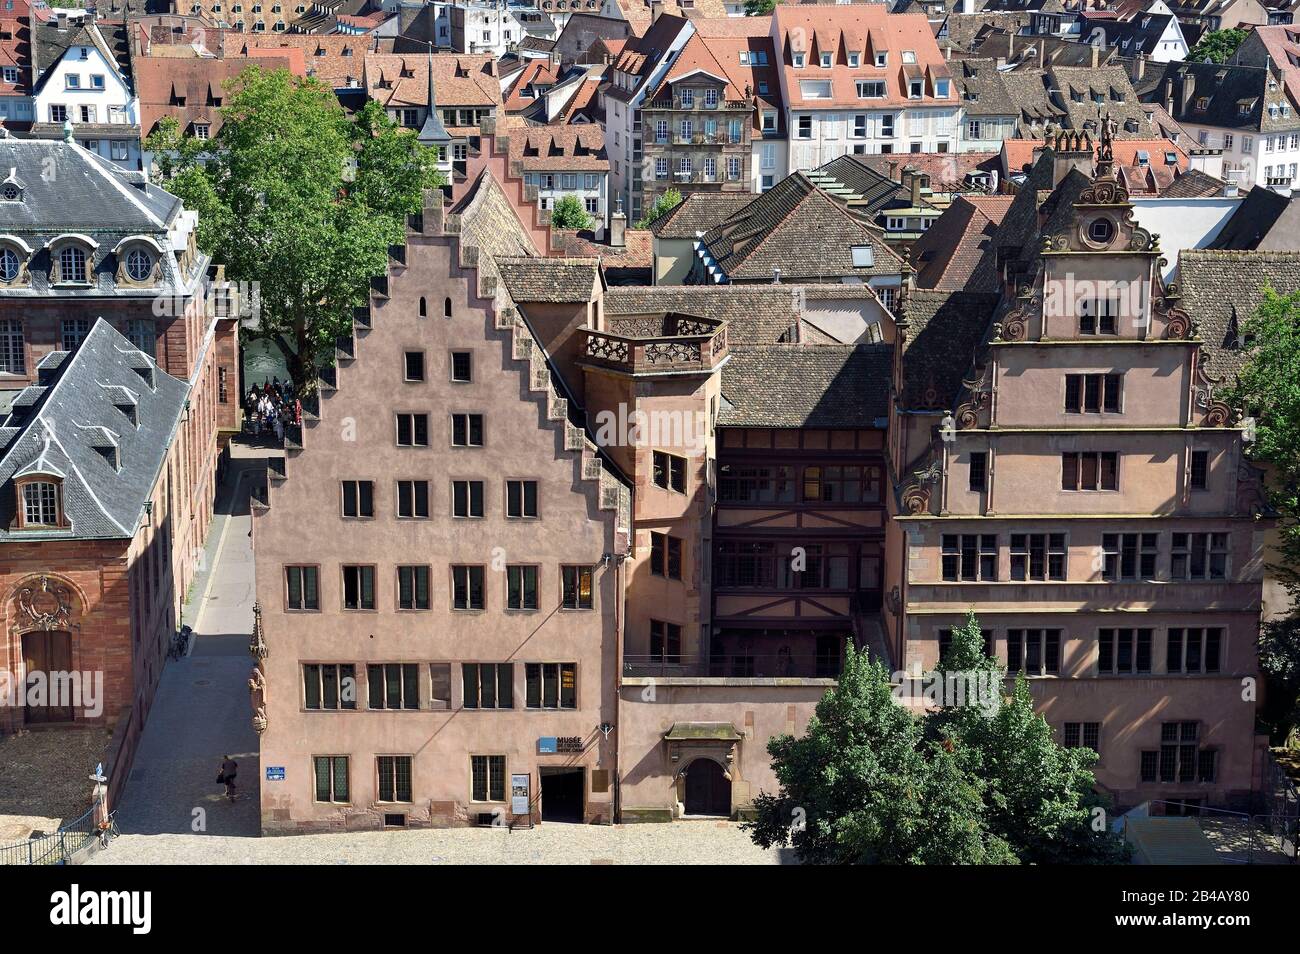 France, Bas Rhin, Strasbourg, old town listed as World Heritage by UNESCO, the Fondation de l'Oeuvre Notre-Dame with two crow-stepped gables Stock Photo